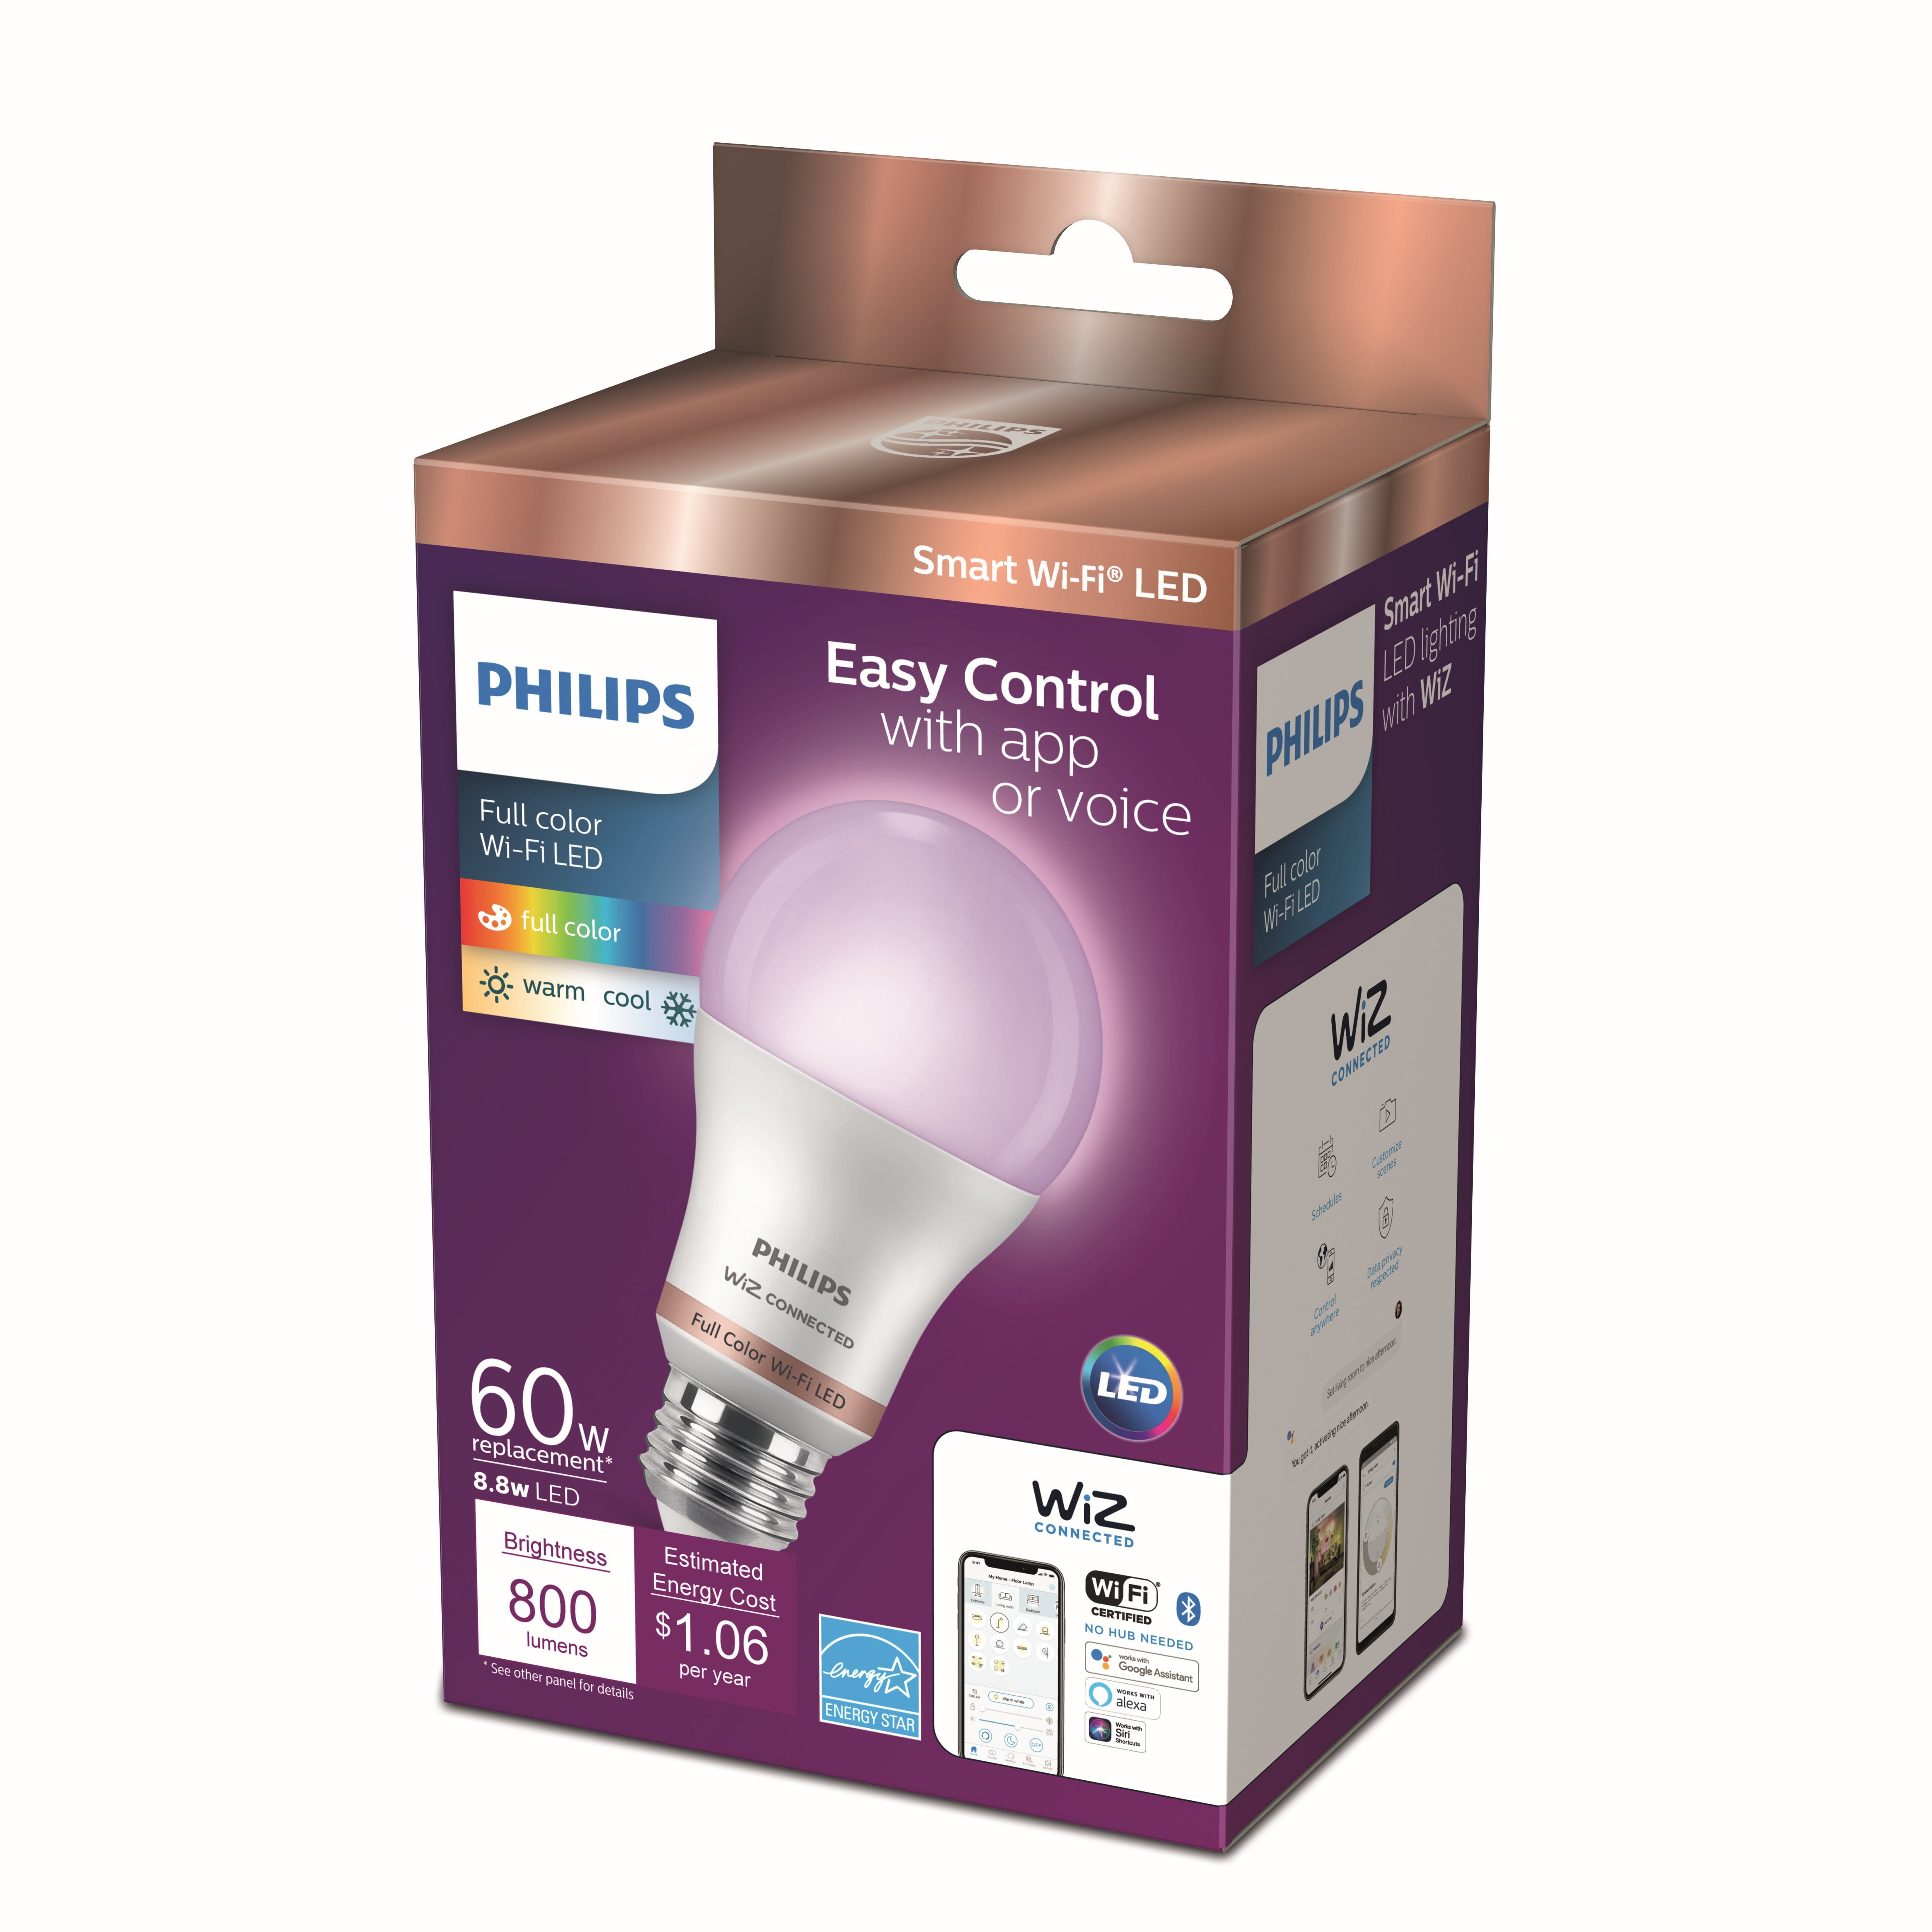 kapital Trofast fungere Philips Smart LED 60-Watt A19 General Purpose Light Bulb, Frosted Color &  Tunable White, Non-Dimmable, E26 Medium Base (1-Pack) - Walmart.com